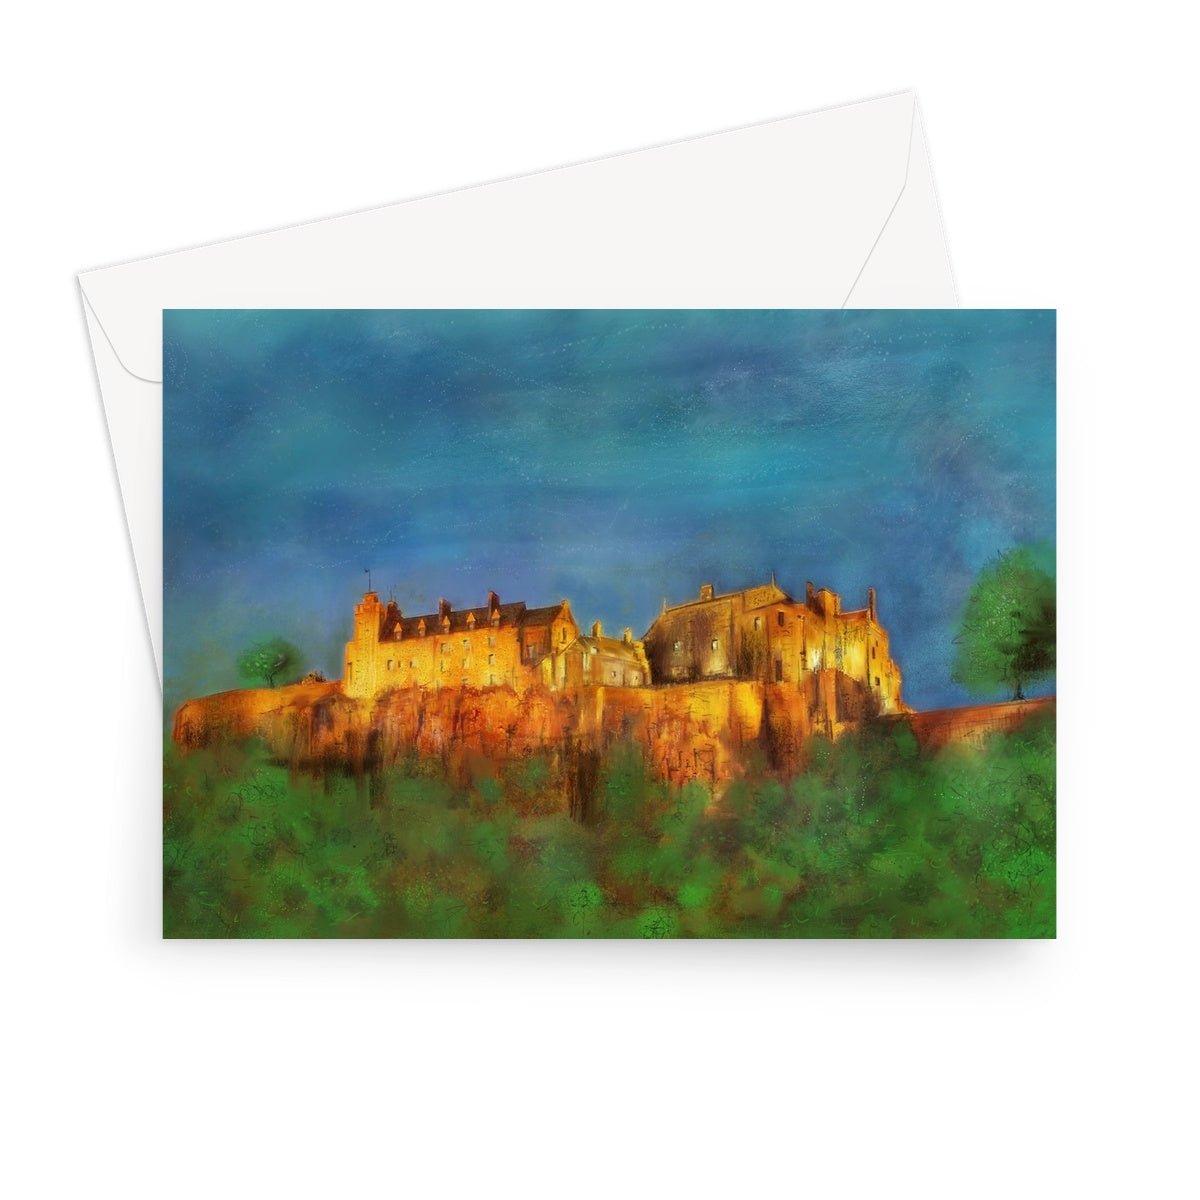 Stirling Castle Art Gifts Greeting Card-Greetings Cards-Scottish Castles Art Gallery-7"x5"-10 Cards-Paintings, Prints, Homeware, Art Gifts From Scotland By Scottish Artist Kevin Hunter